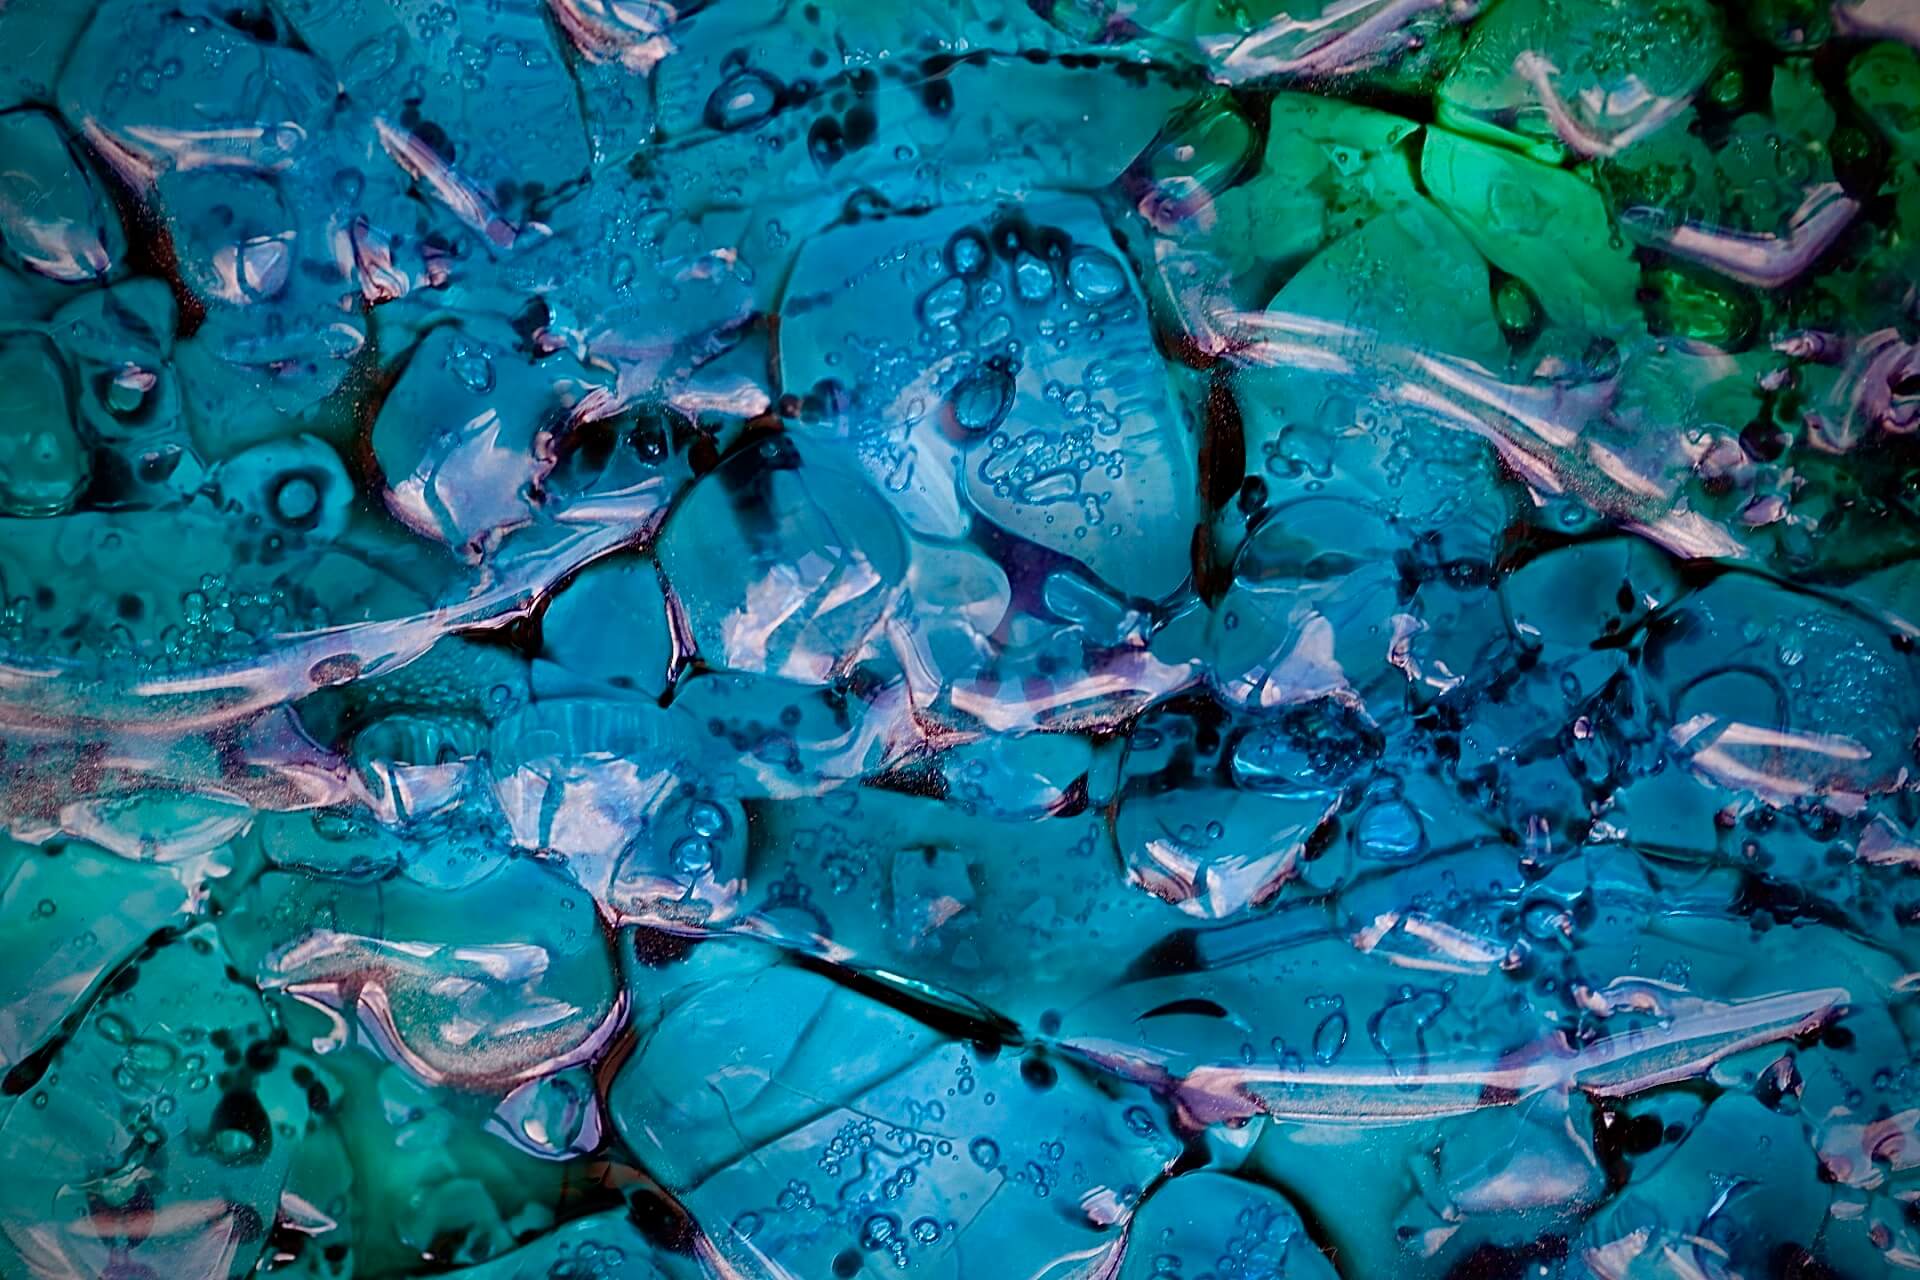 glass art sculpture inspired by Cornwall seascape